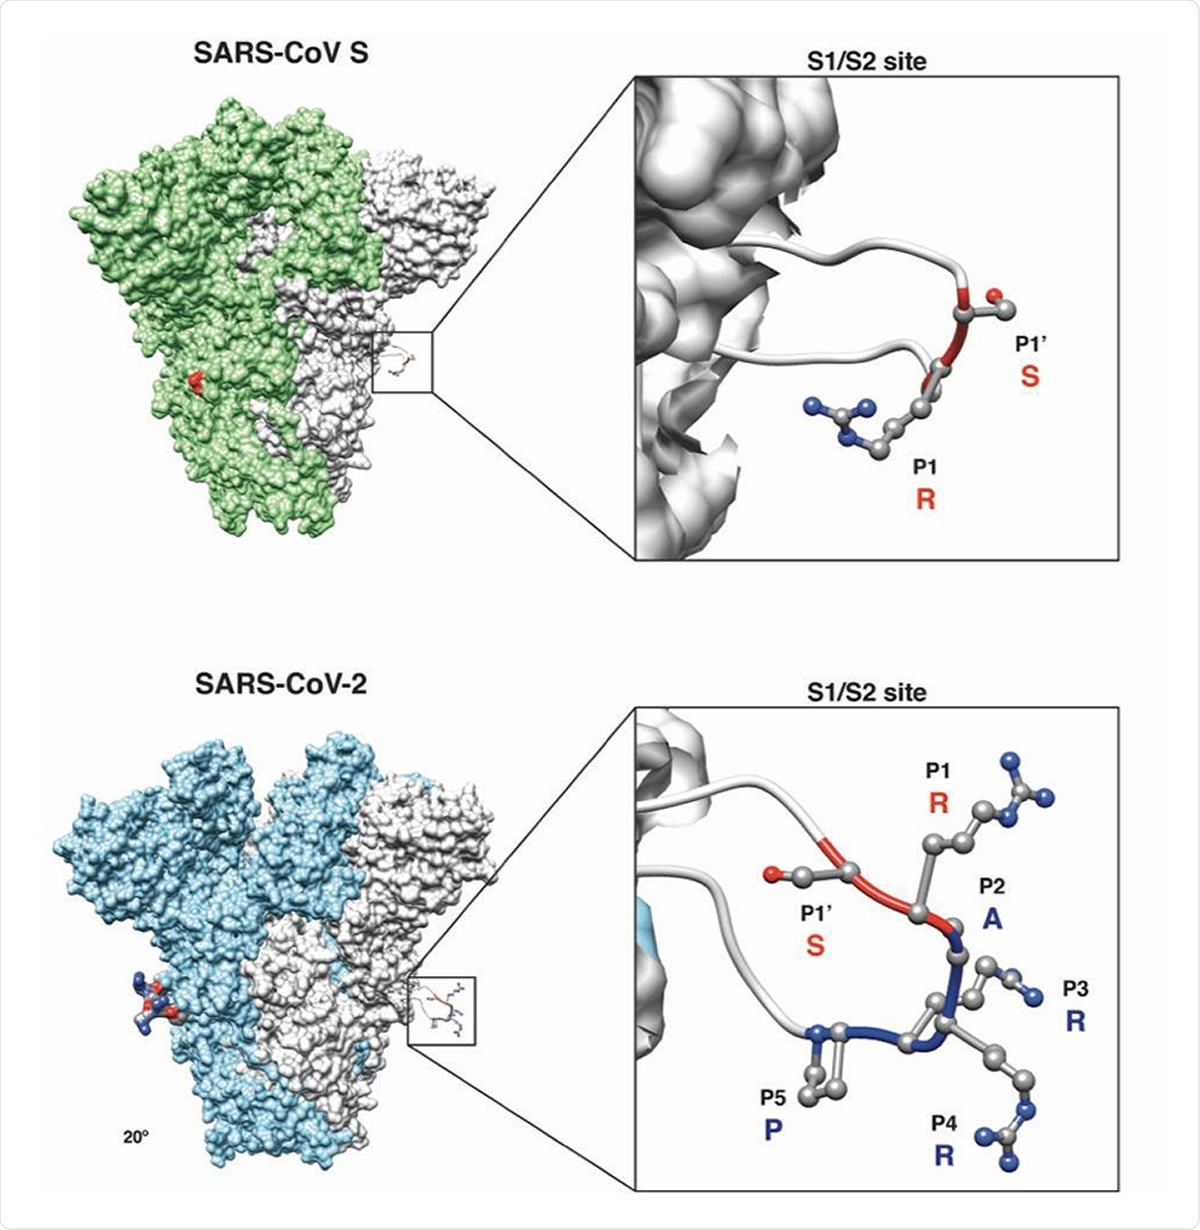 Predicted structural model of the SARS-CoV and SARS-CoV-2 S proteins. (Inset) Magnification of S1/S2 site with conserved R and S residues (red ribbon) and the unique four amino acid insertion P-R-R-A for SARS-CoV-2 (blue ribbon) are shown. The P’s denote the position of that amino acid from the S1/S2 cleavage site, with P1-P5 referring to amino acids before the cleavage site and P1’ referring to amino acids after the cleavage site.